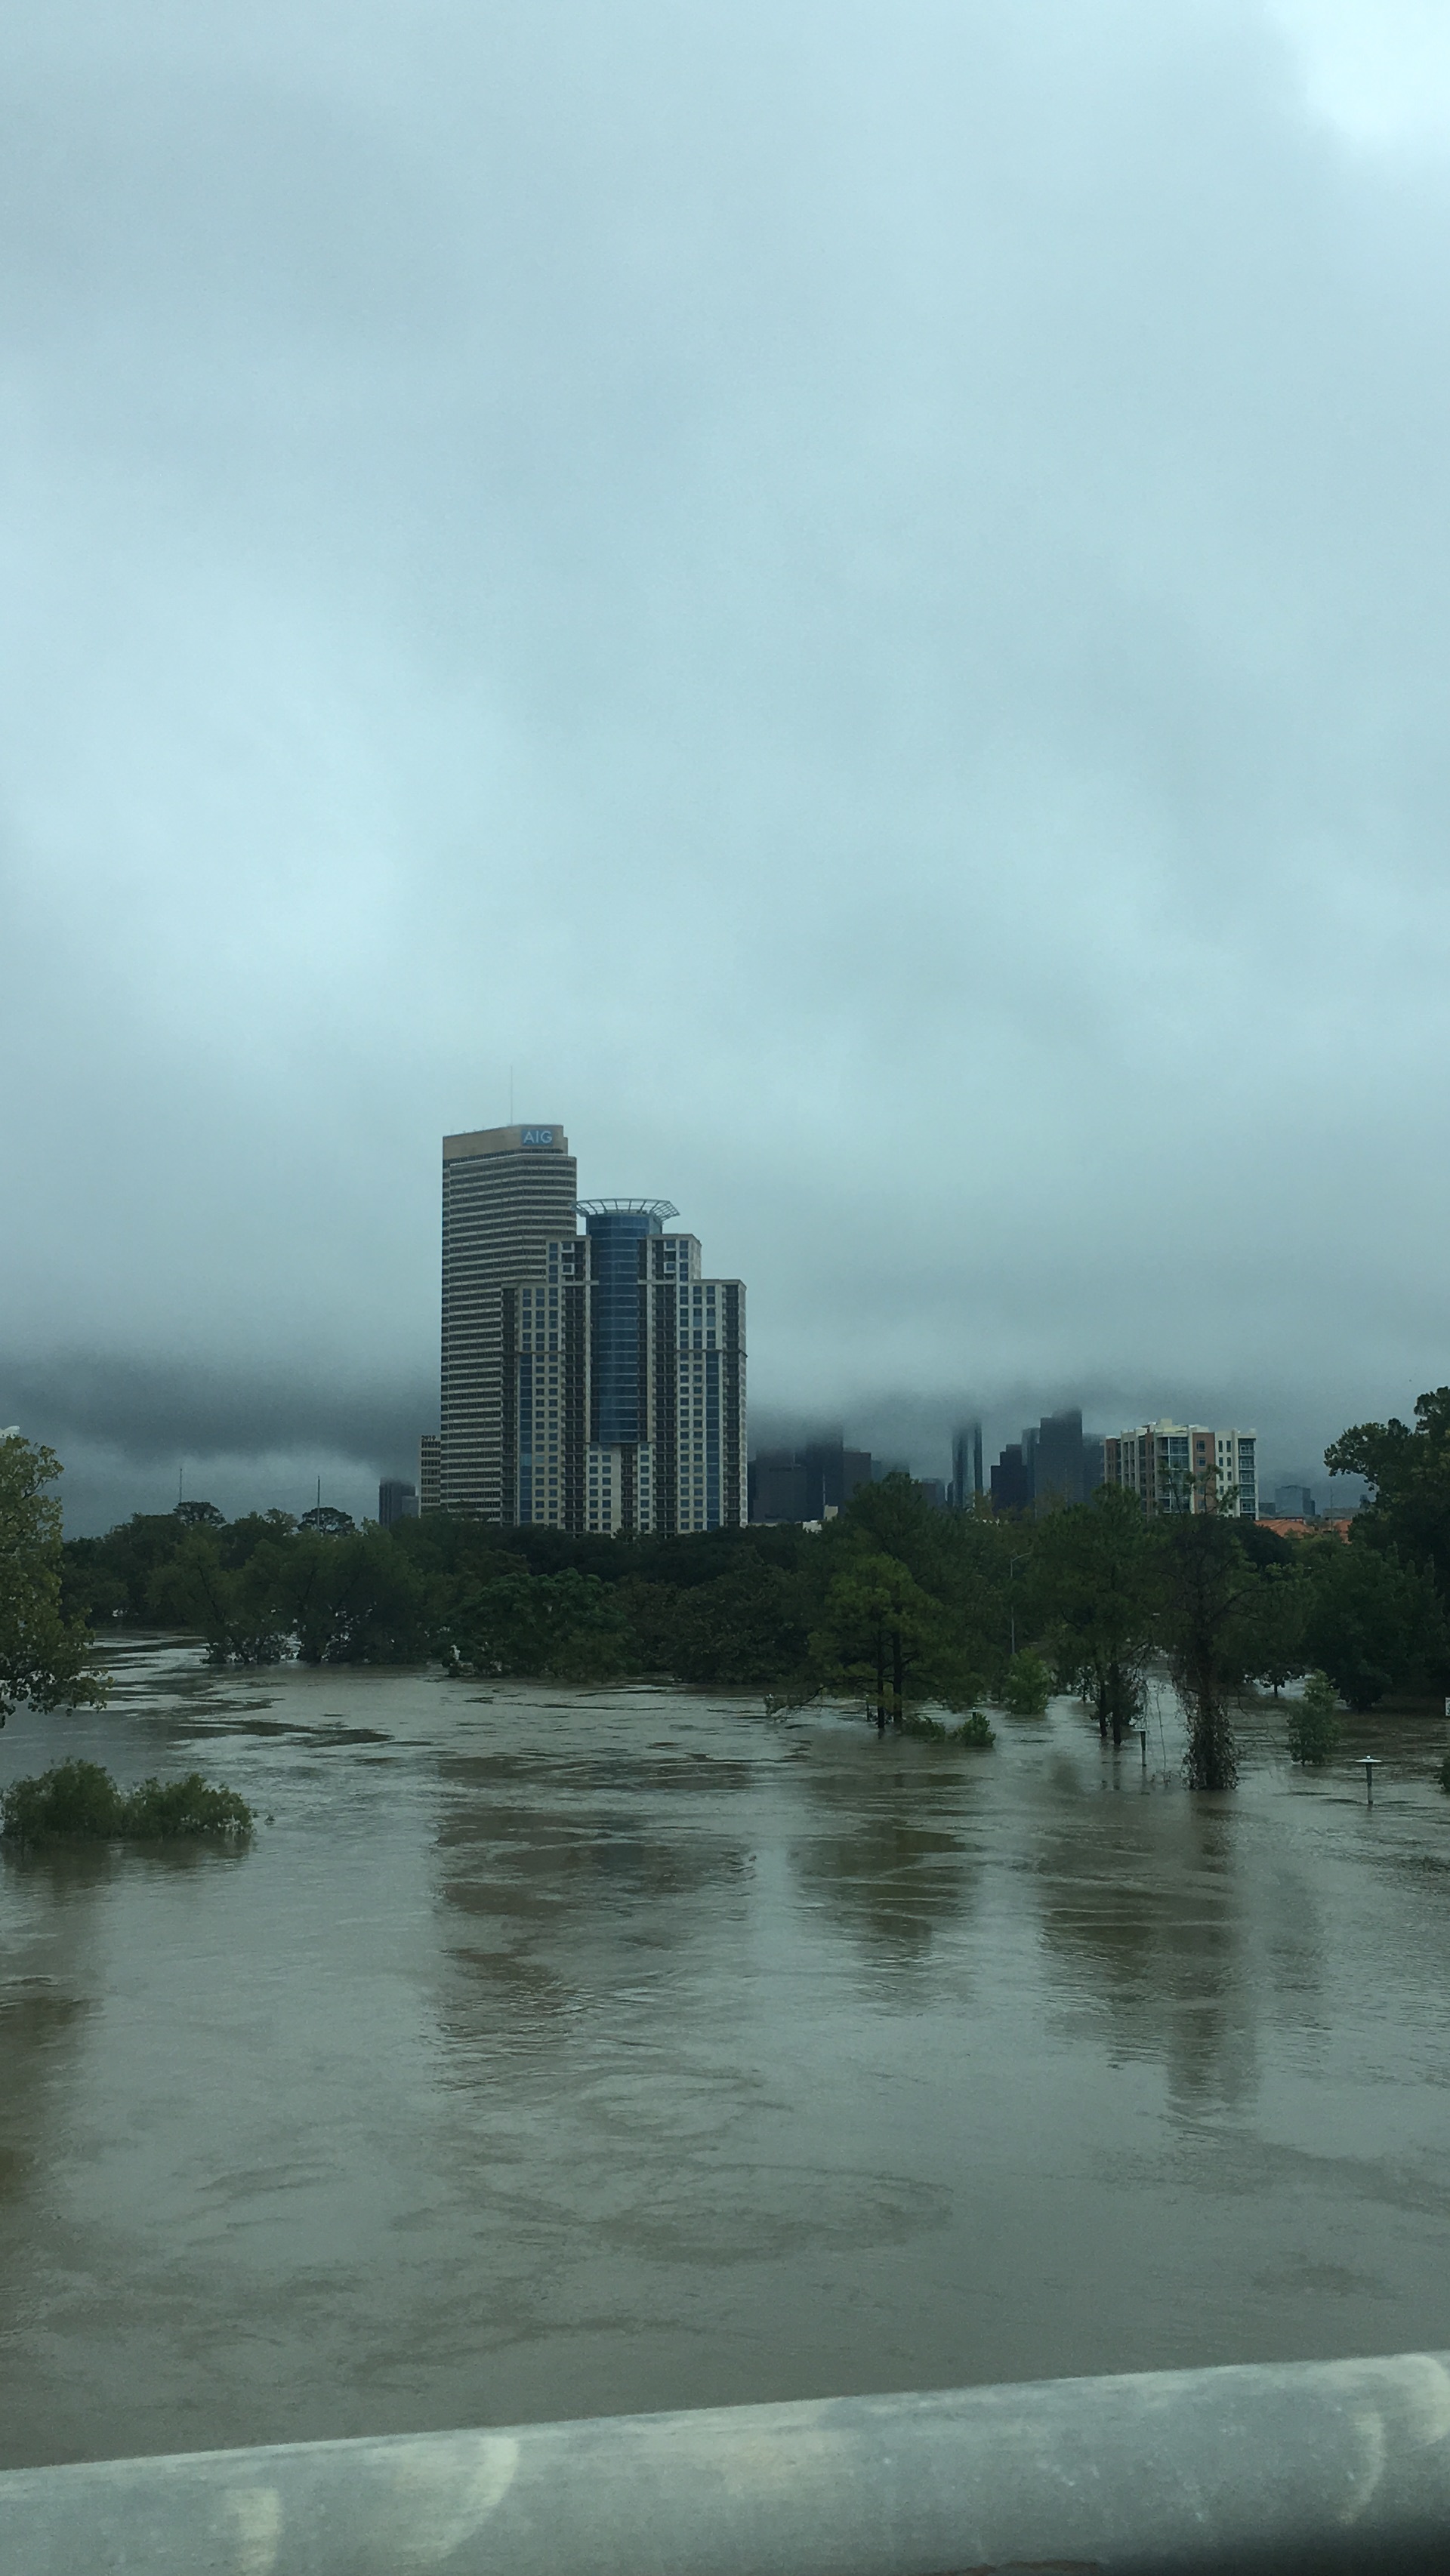 And here's a look toward downtown. That's Buffalo Bayou up out of its banks and covering two major roads. We live near a bayou. Houston is a marsh. We're used to flooding. This was bizarre.